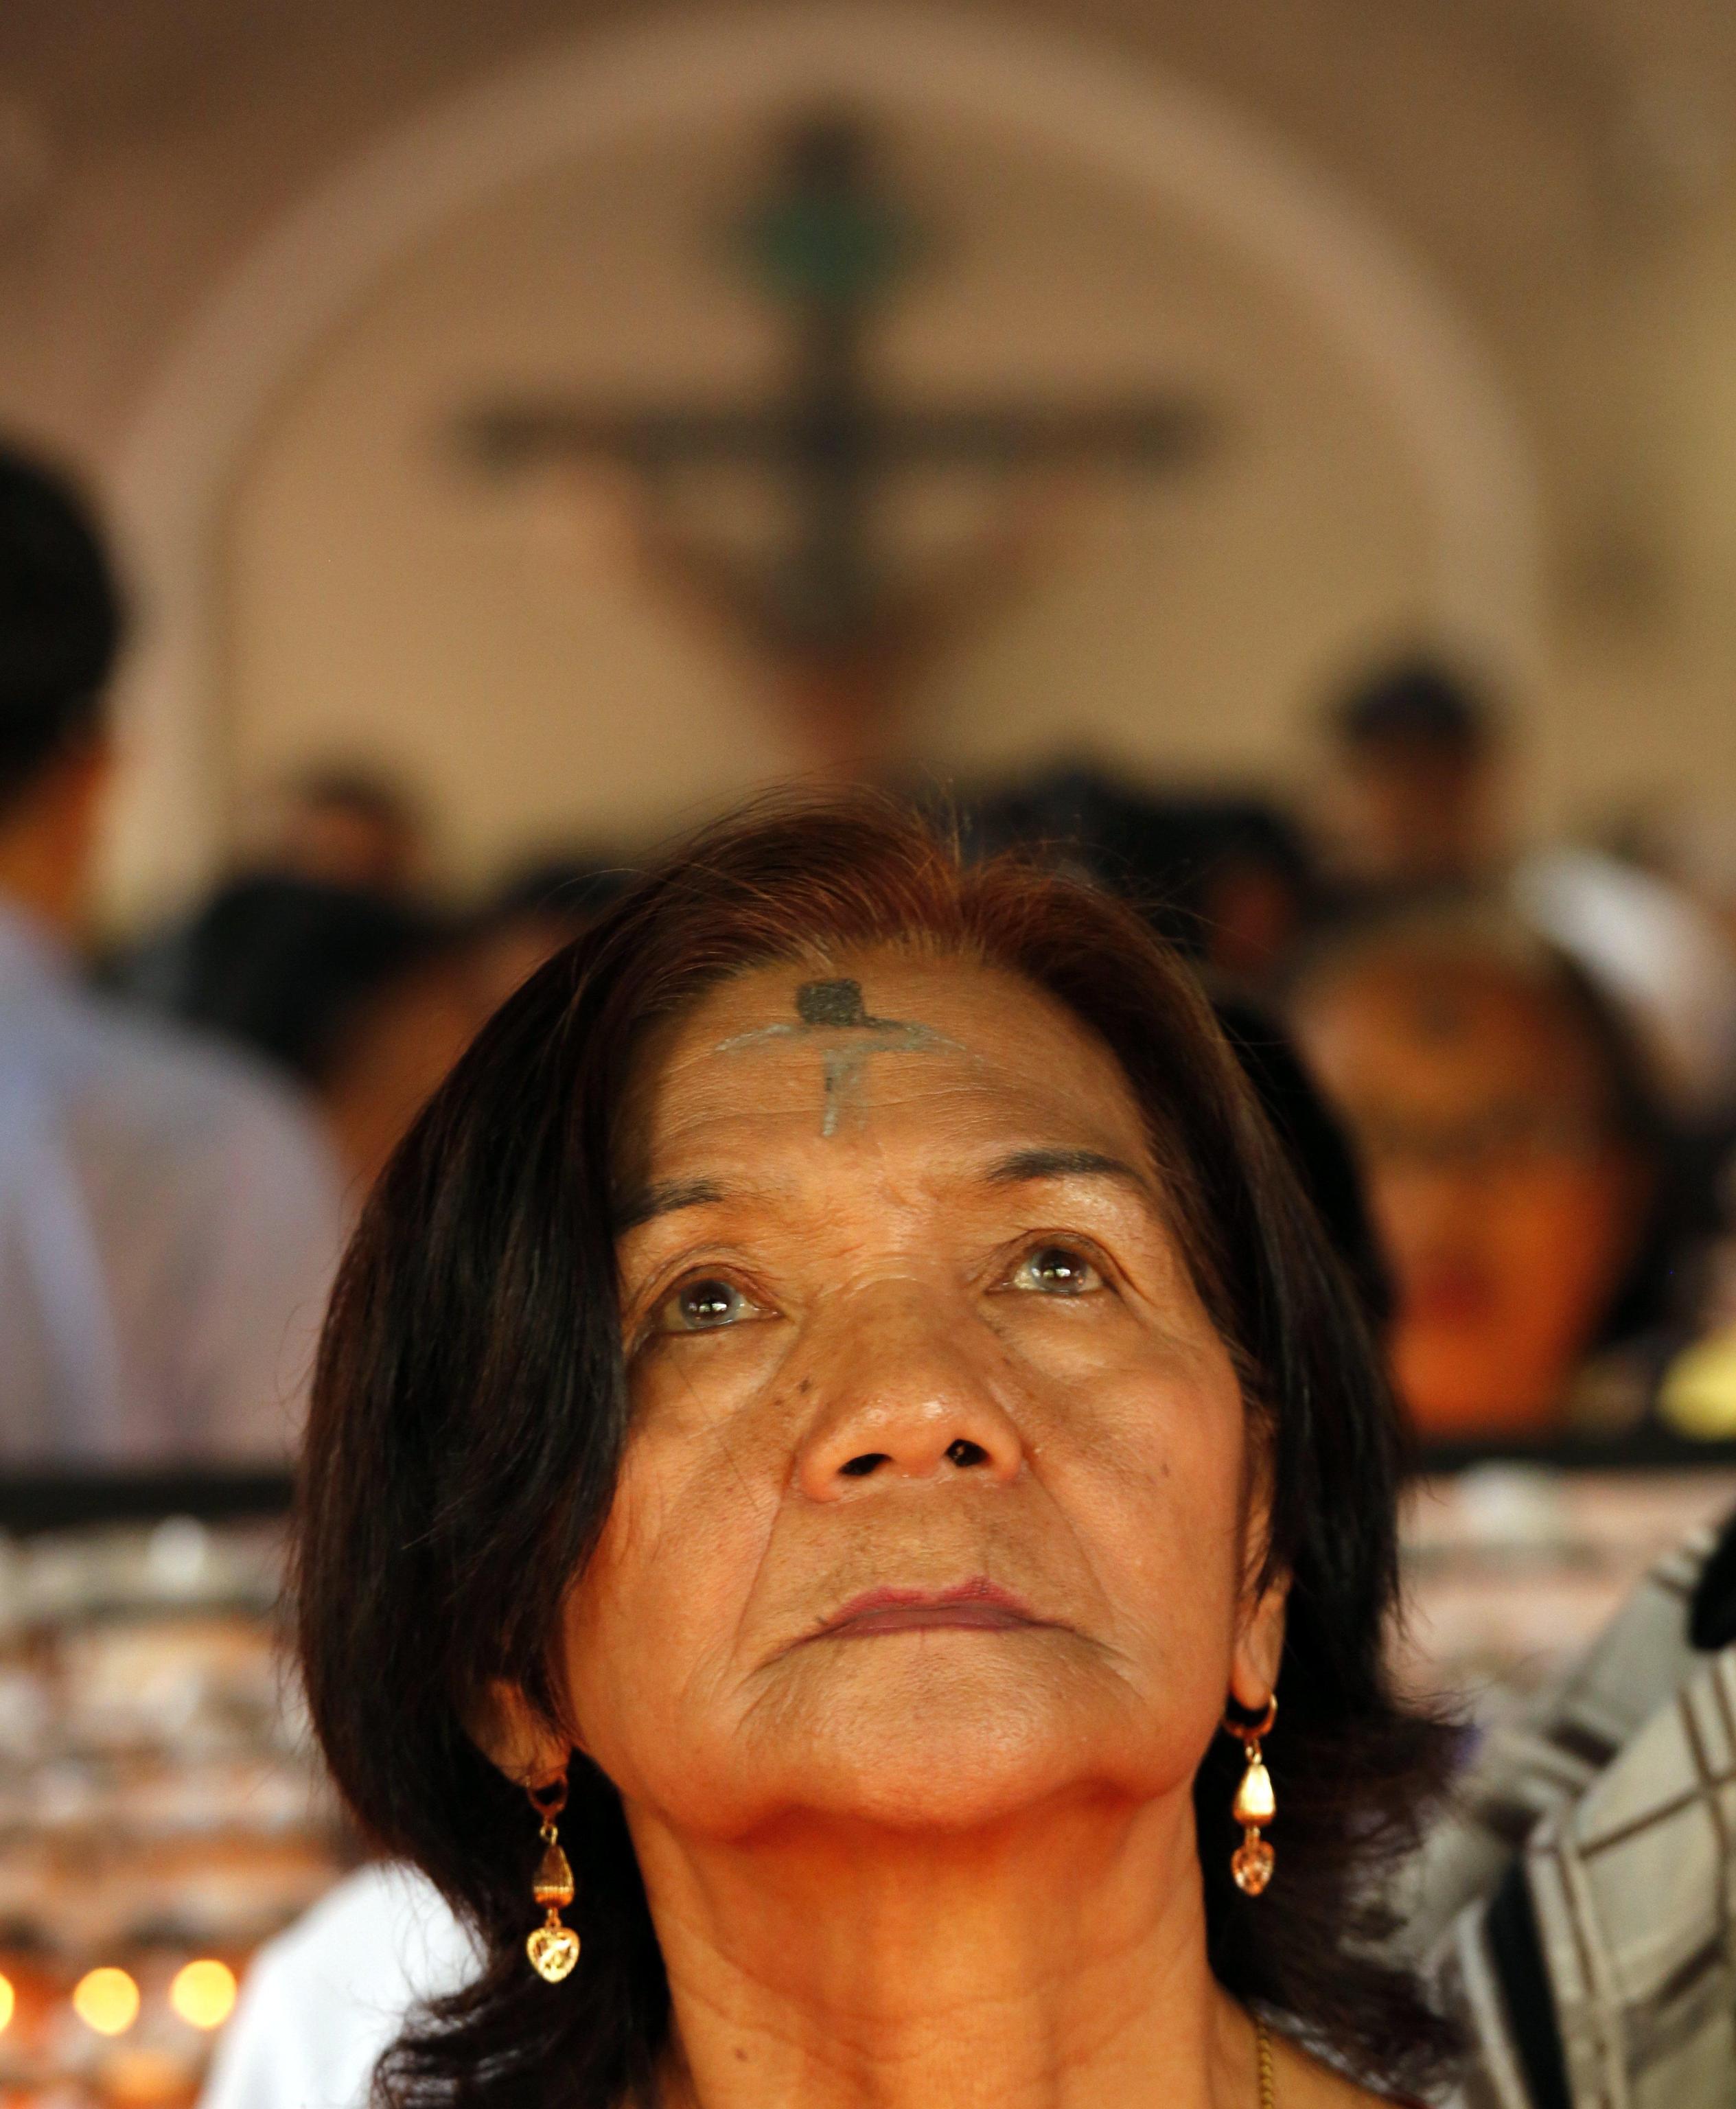 epa05822037 A Filipino devotee with cross marking on her forehead attends a Holy Mass at a church during Ash Wednesday in Pasay city, south of Manila, Philippines, 01 March 2017. Filipino Catholic started the 40-day Lenten Season on Ash Wednesday by going to church to have their forehead marked with an ash cross sign. The rite is part of the culture of many Filipino Catholics, symbolizing their acceptance for the start of Lent and to show their sincere efforts and discipline to cleanse their lives of sin through prayers.  EPA/FRANCIS R. MALASIG